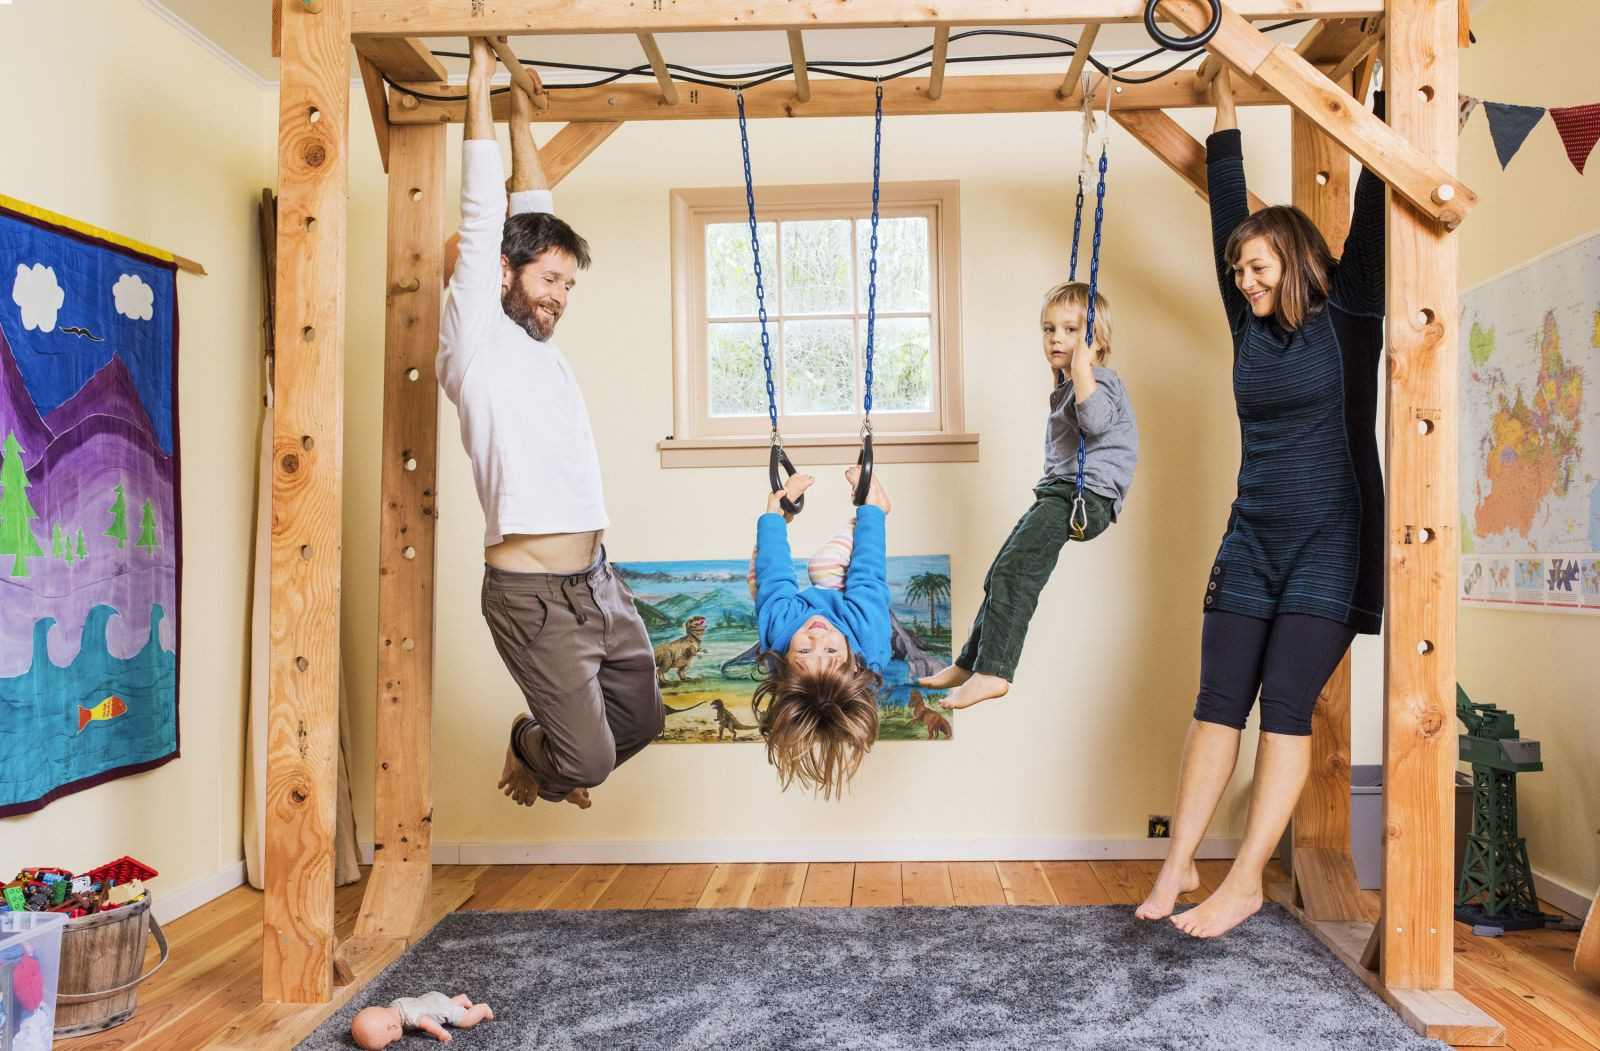 Indoor Gym Kids
 This Family Traded Mattresses for Monkey Bars